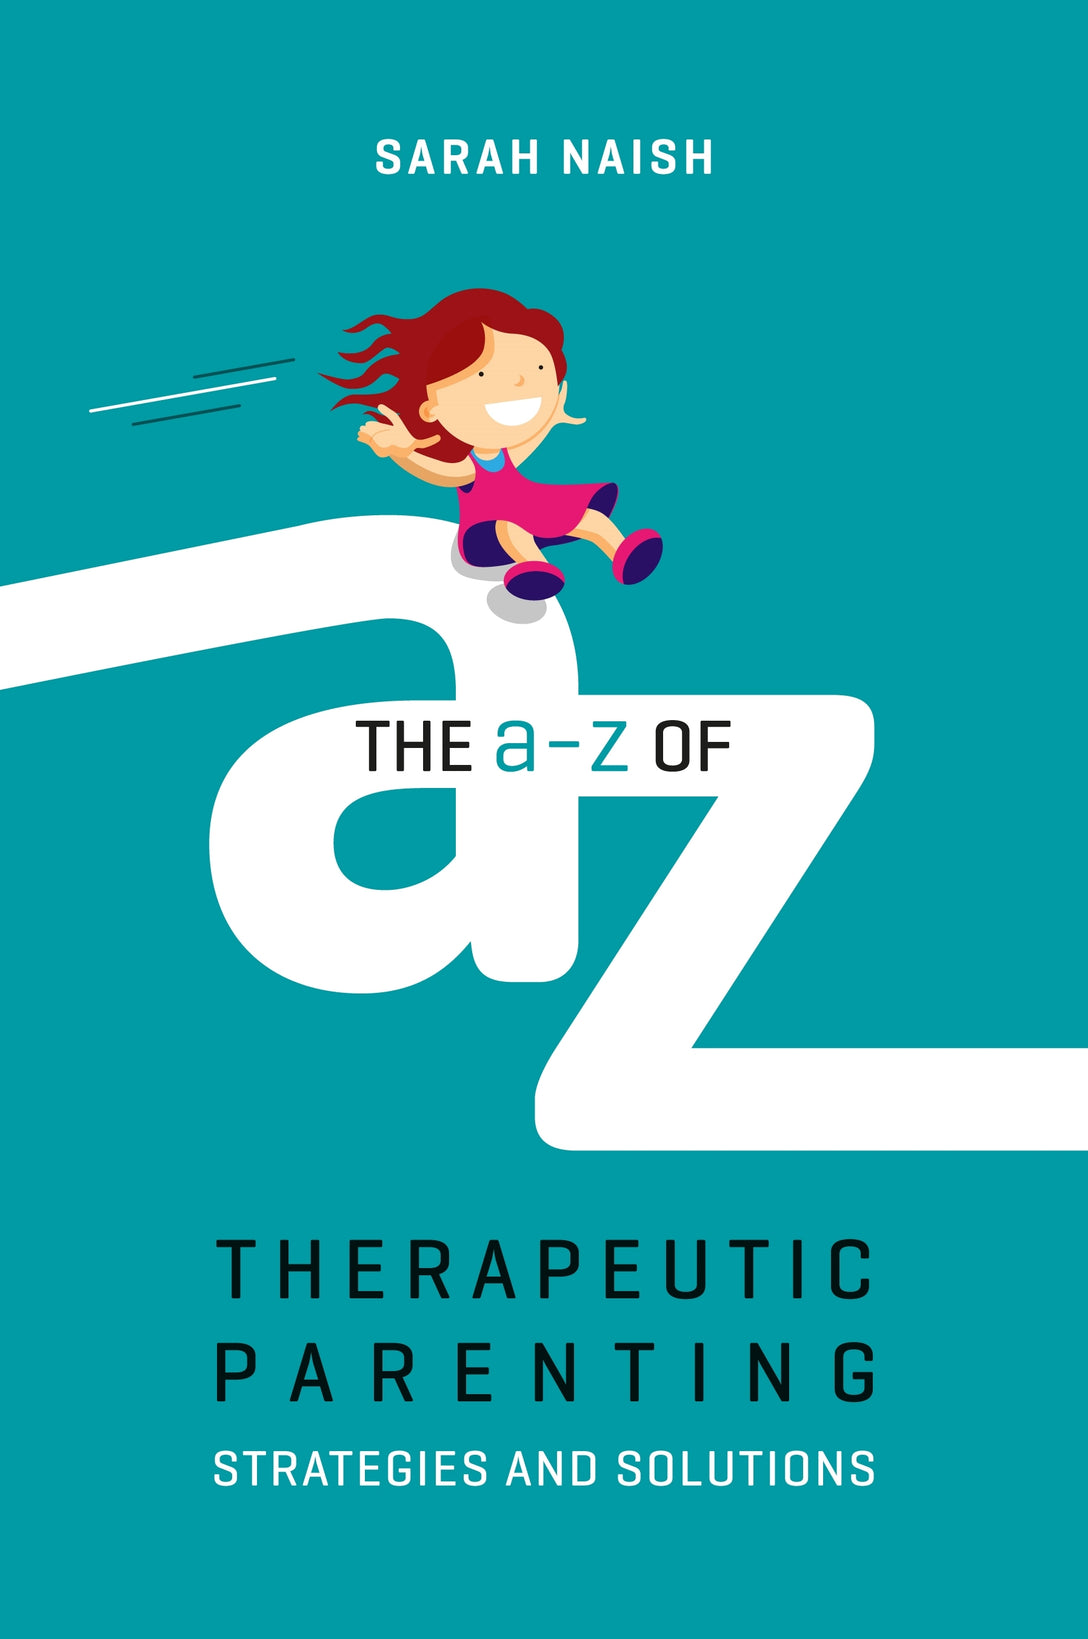 The A-Z of Therapeutic Parenting by Sarah Naish